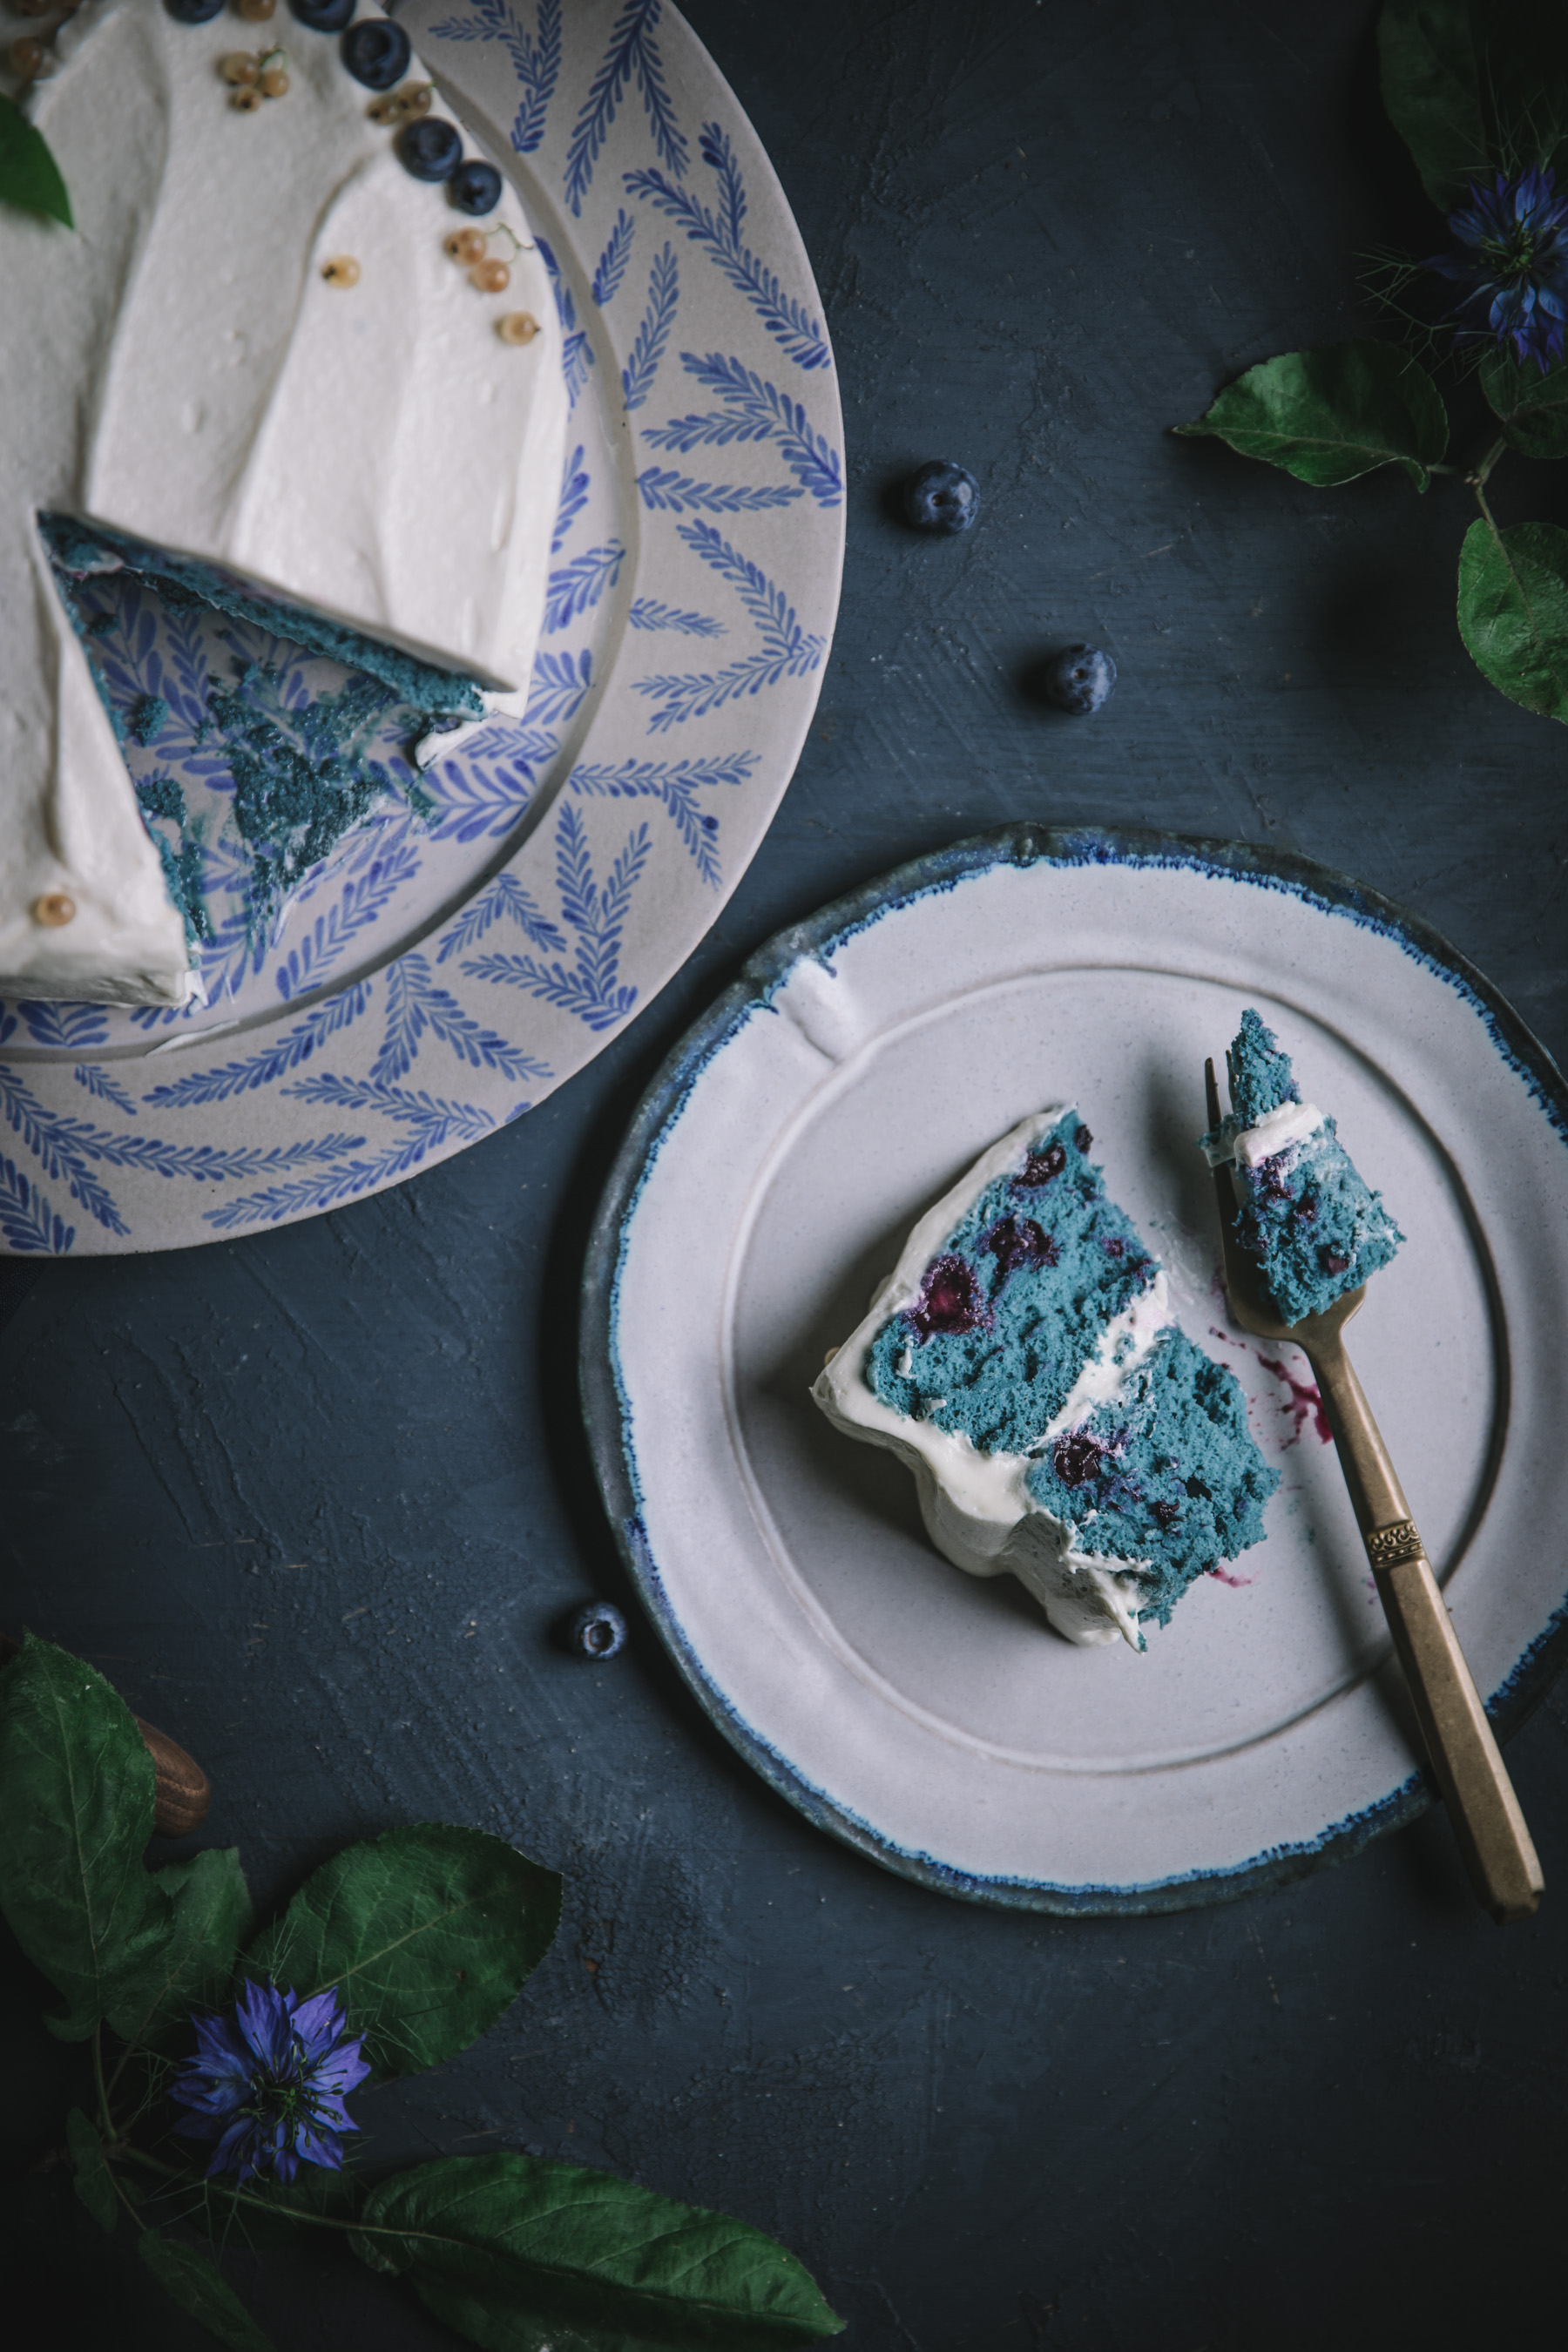 Blue Velvet Cake with Cream Cheese Frosting